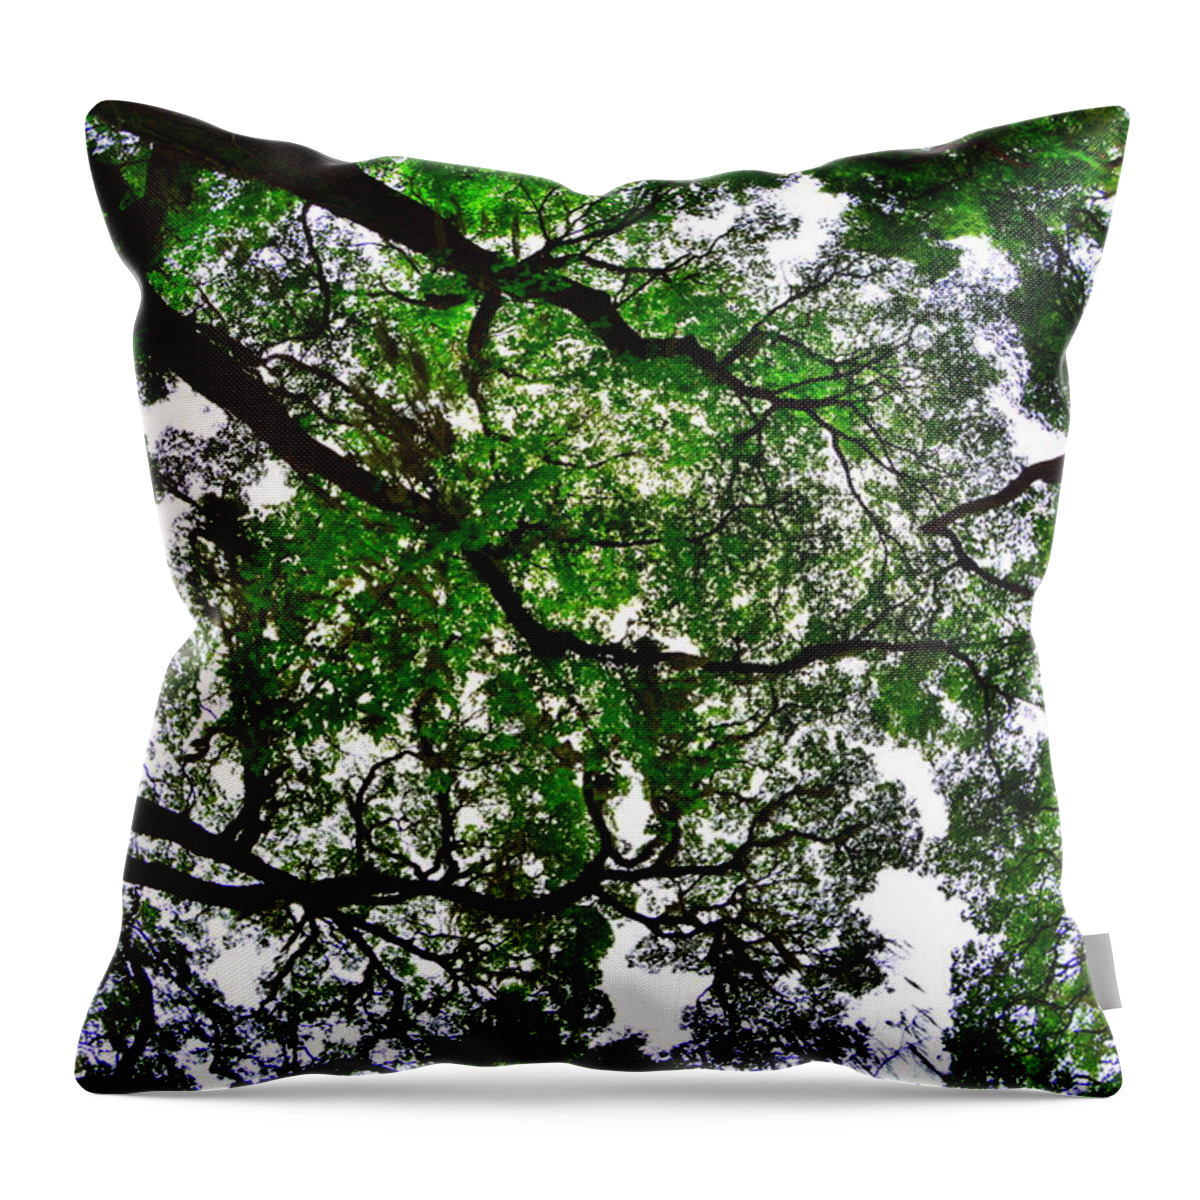 Looking Up The Oaks Throw Pillow featuring the photograph Looking Up The Oaks by Lisa Wooten